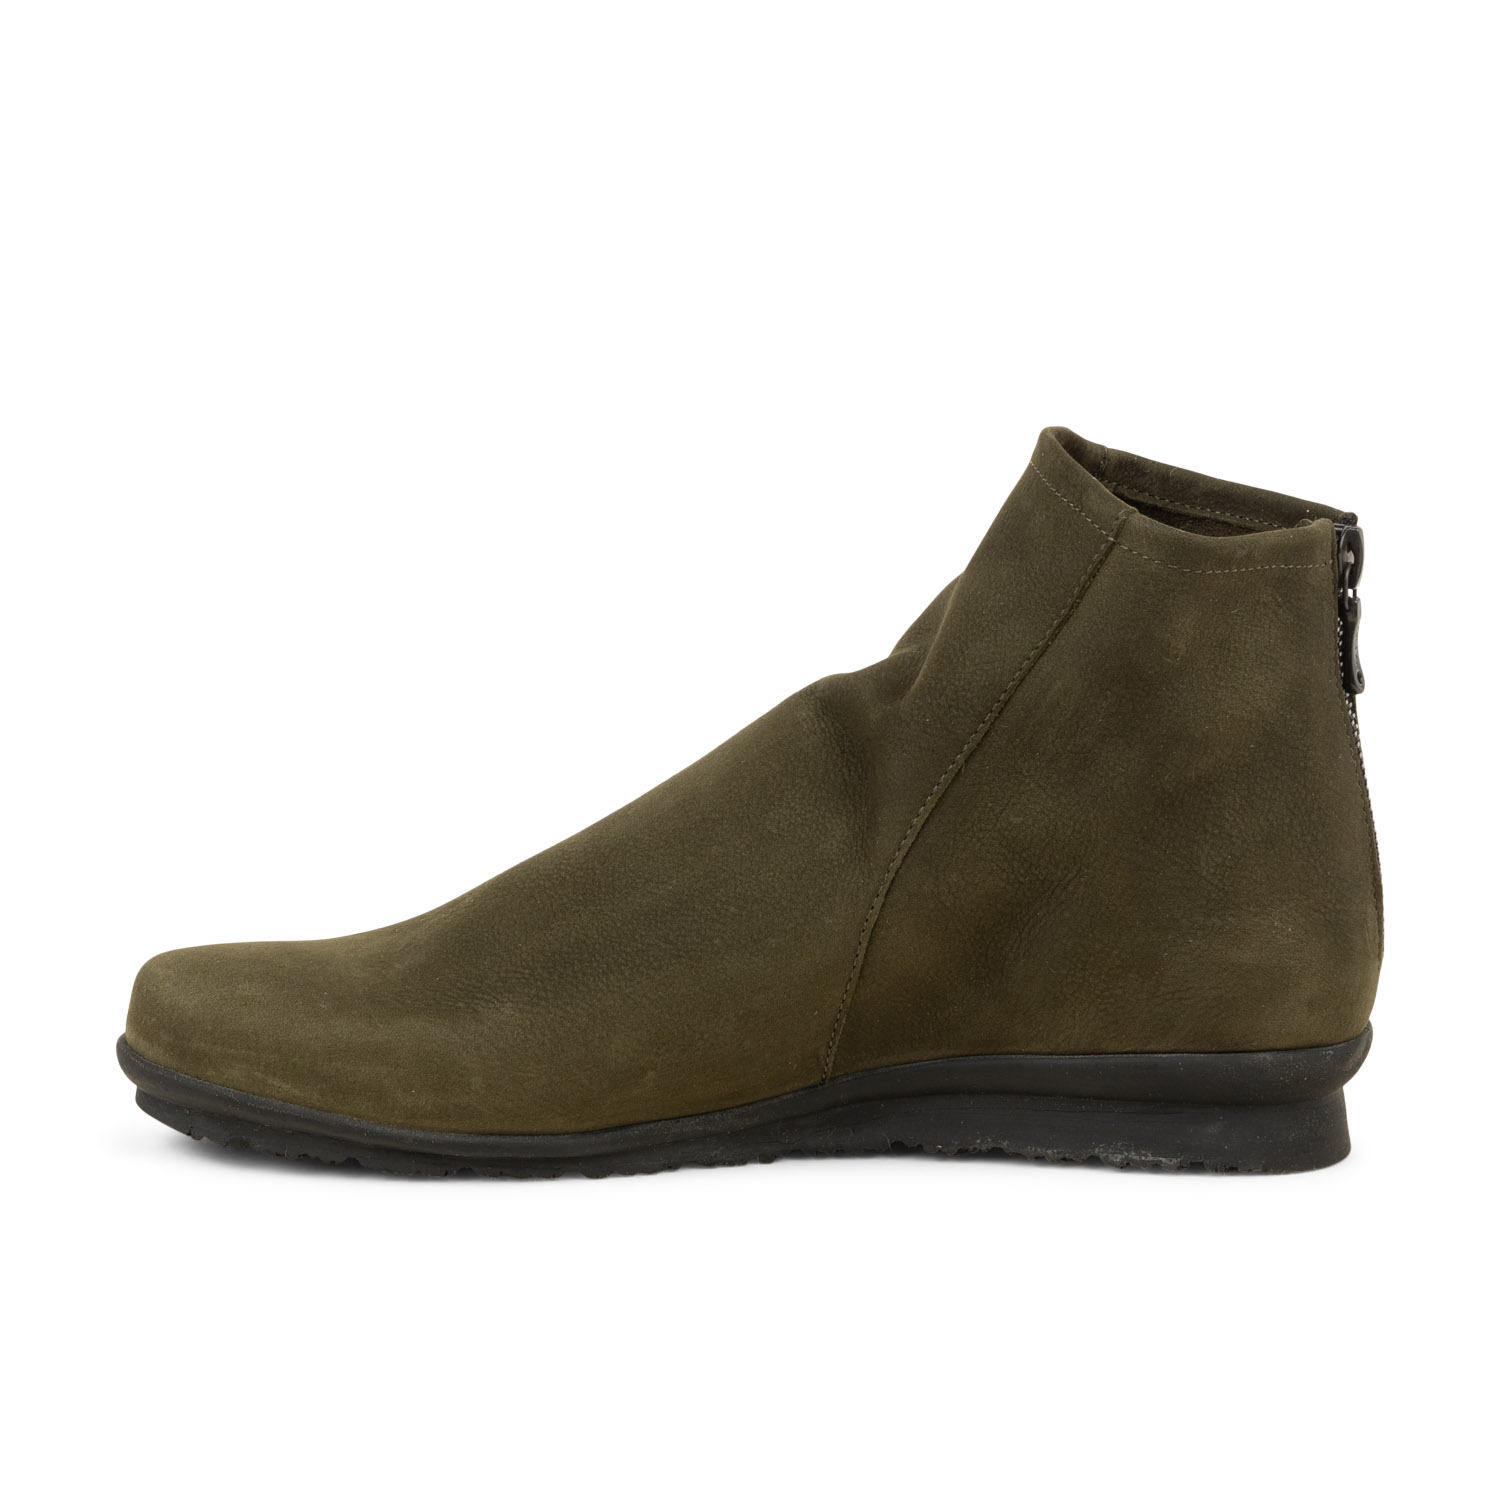 04 - BARYKY - ARCHE - Boots et bottines - Cuir